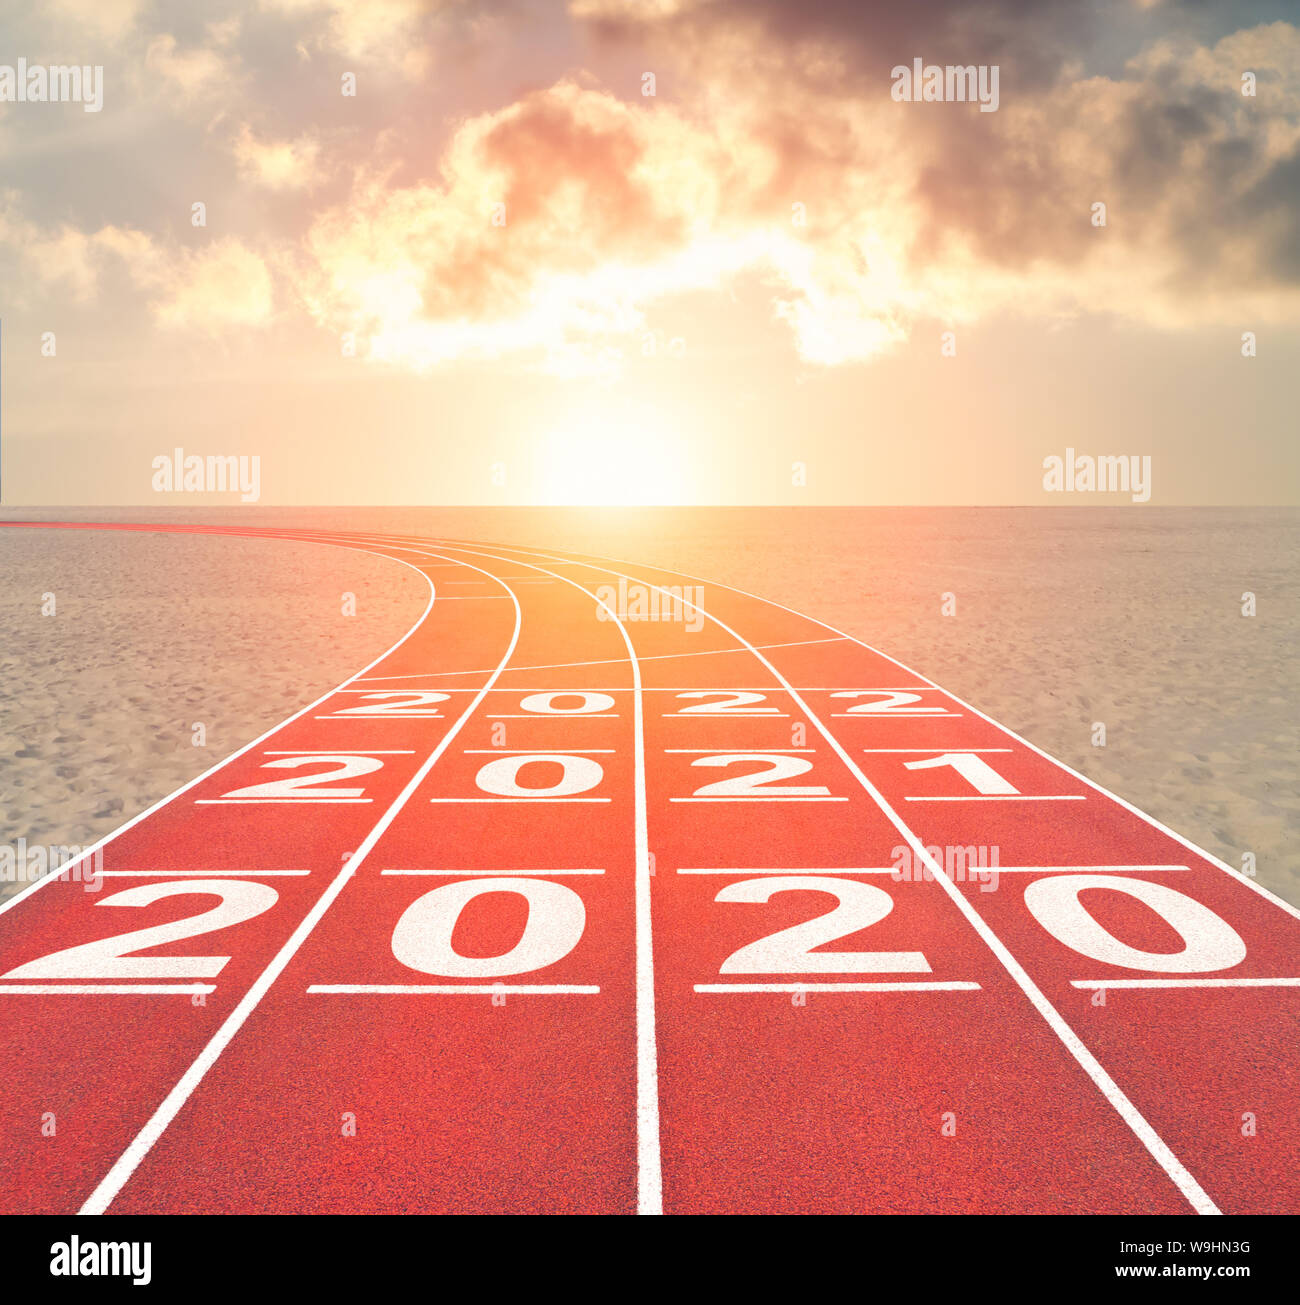 From 2020 into future concept with numbers on running track against sunset desert landscape Stock Photo